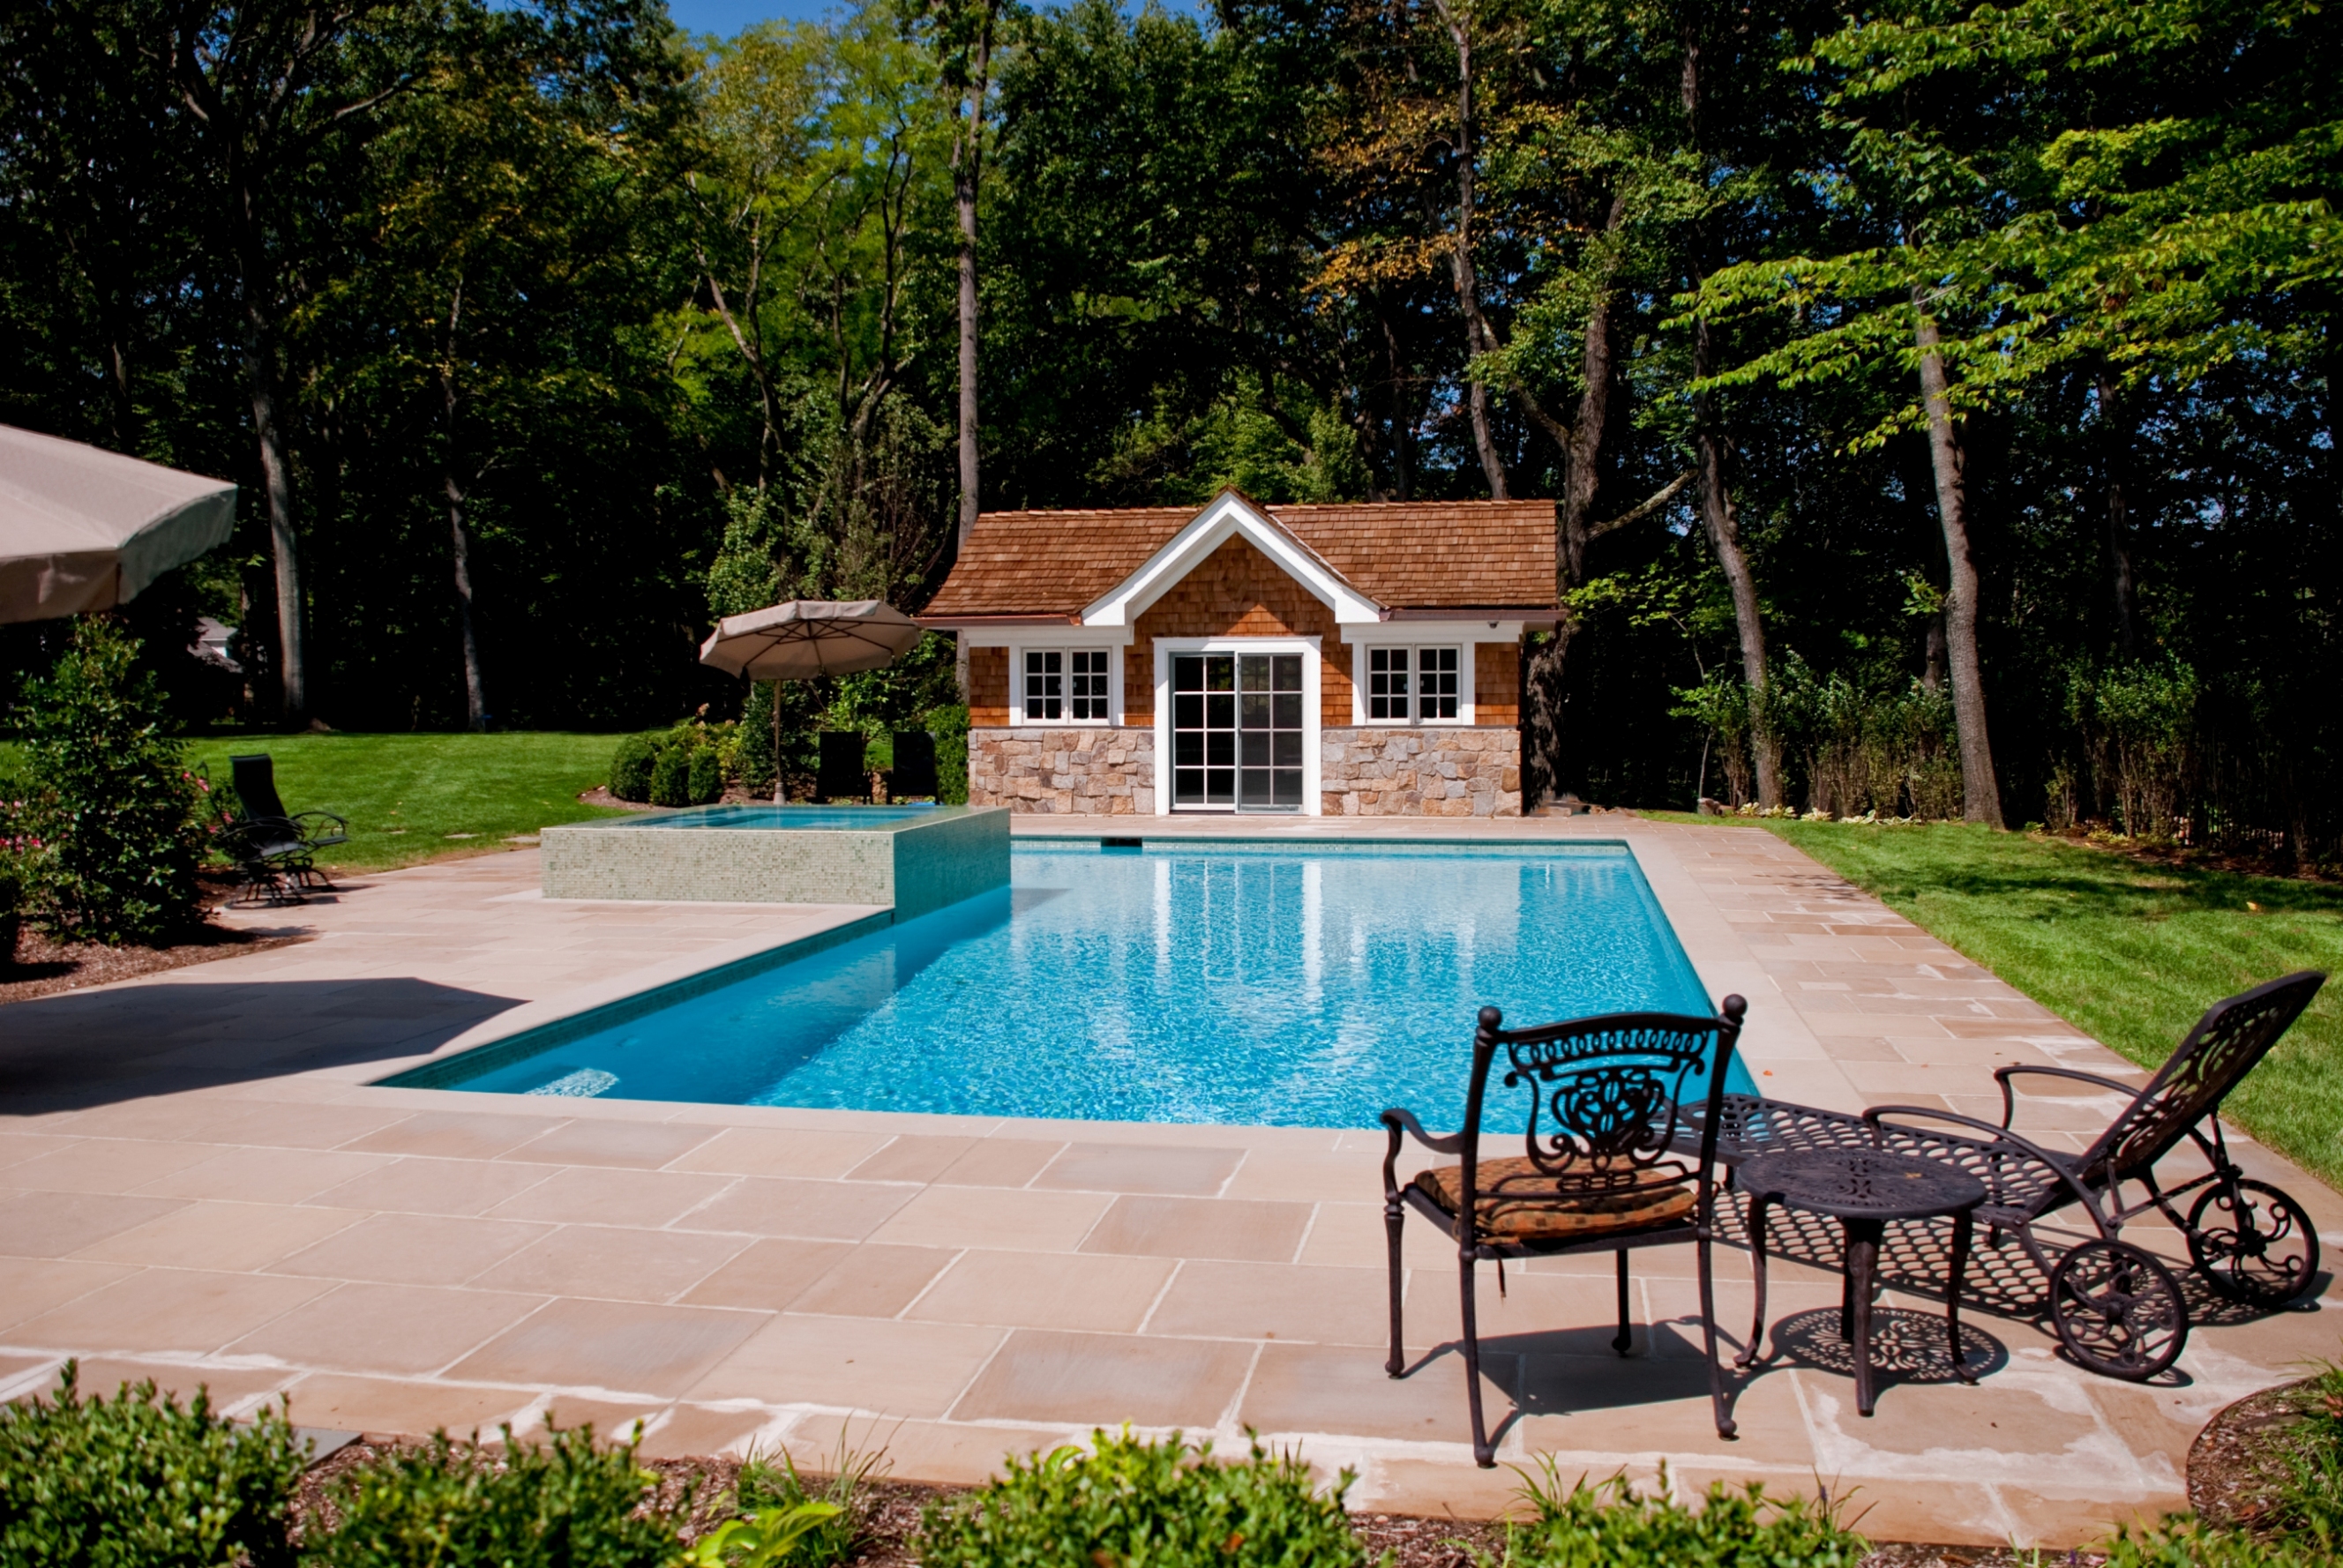 Nj perimeter overflow pool and spa by cipriano custom for Pool design garden